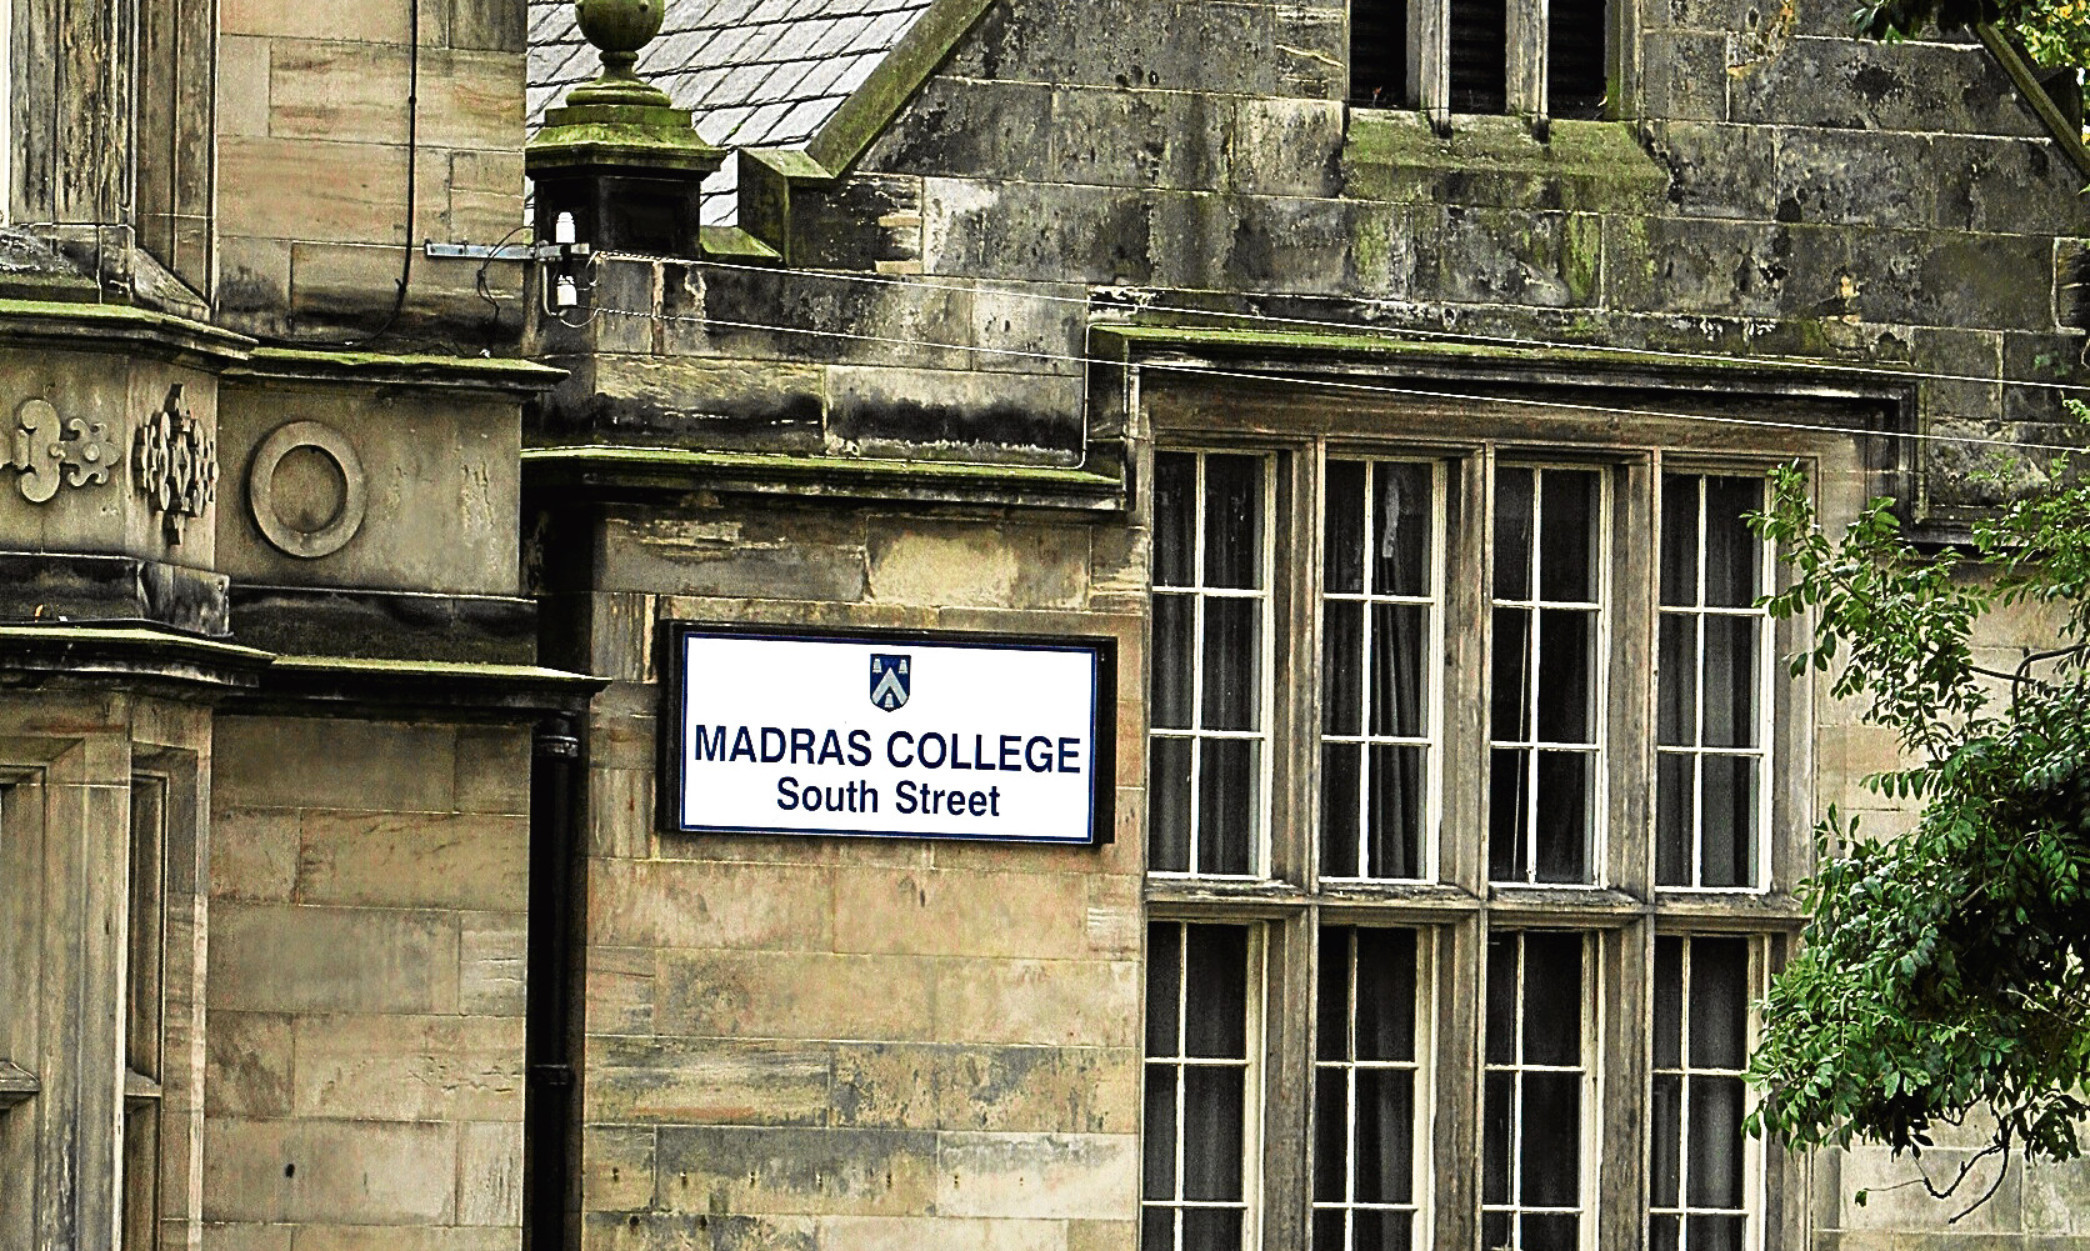 Madras College, South Street, St Andrews.